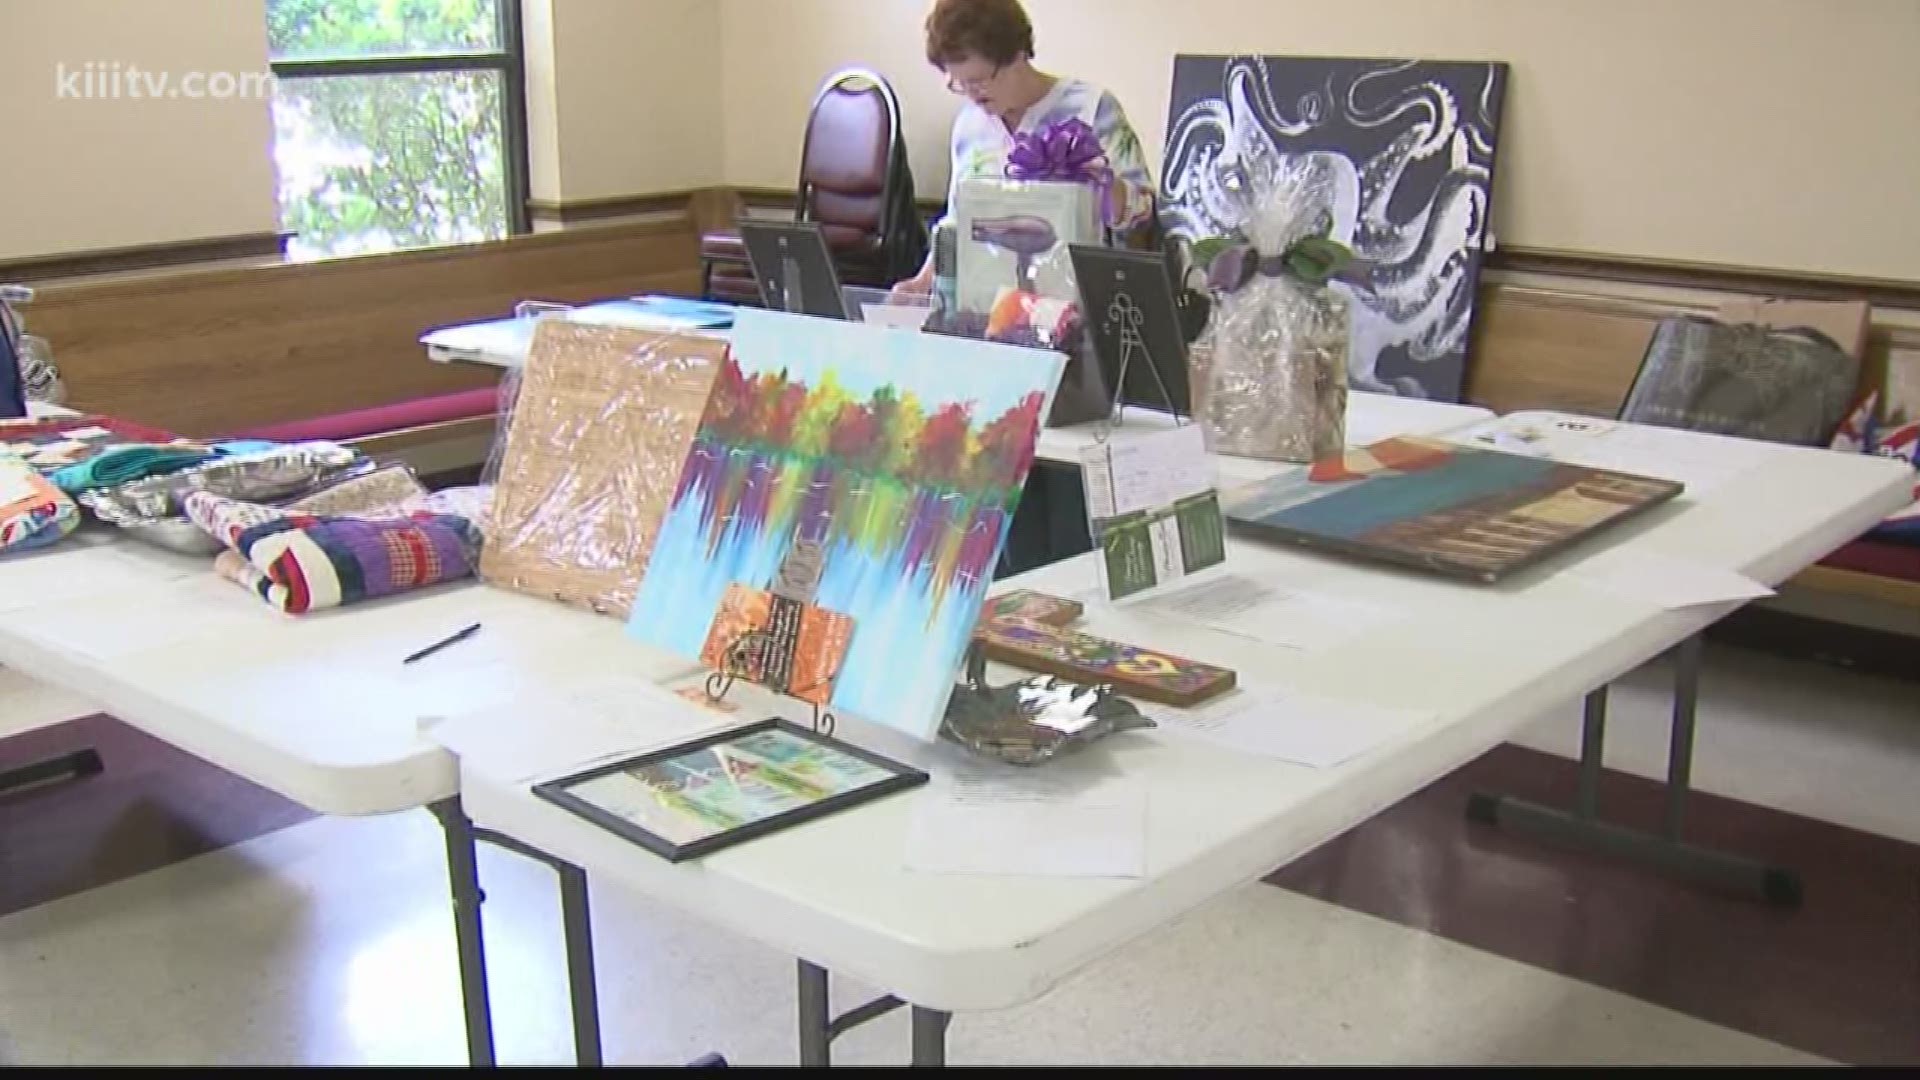 Fundraiser took place to raise funds and awareness on Parkinson's disease.